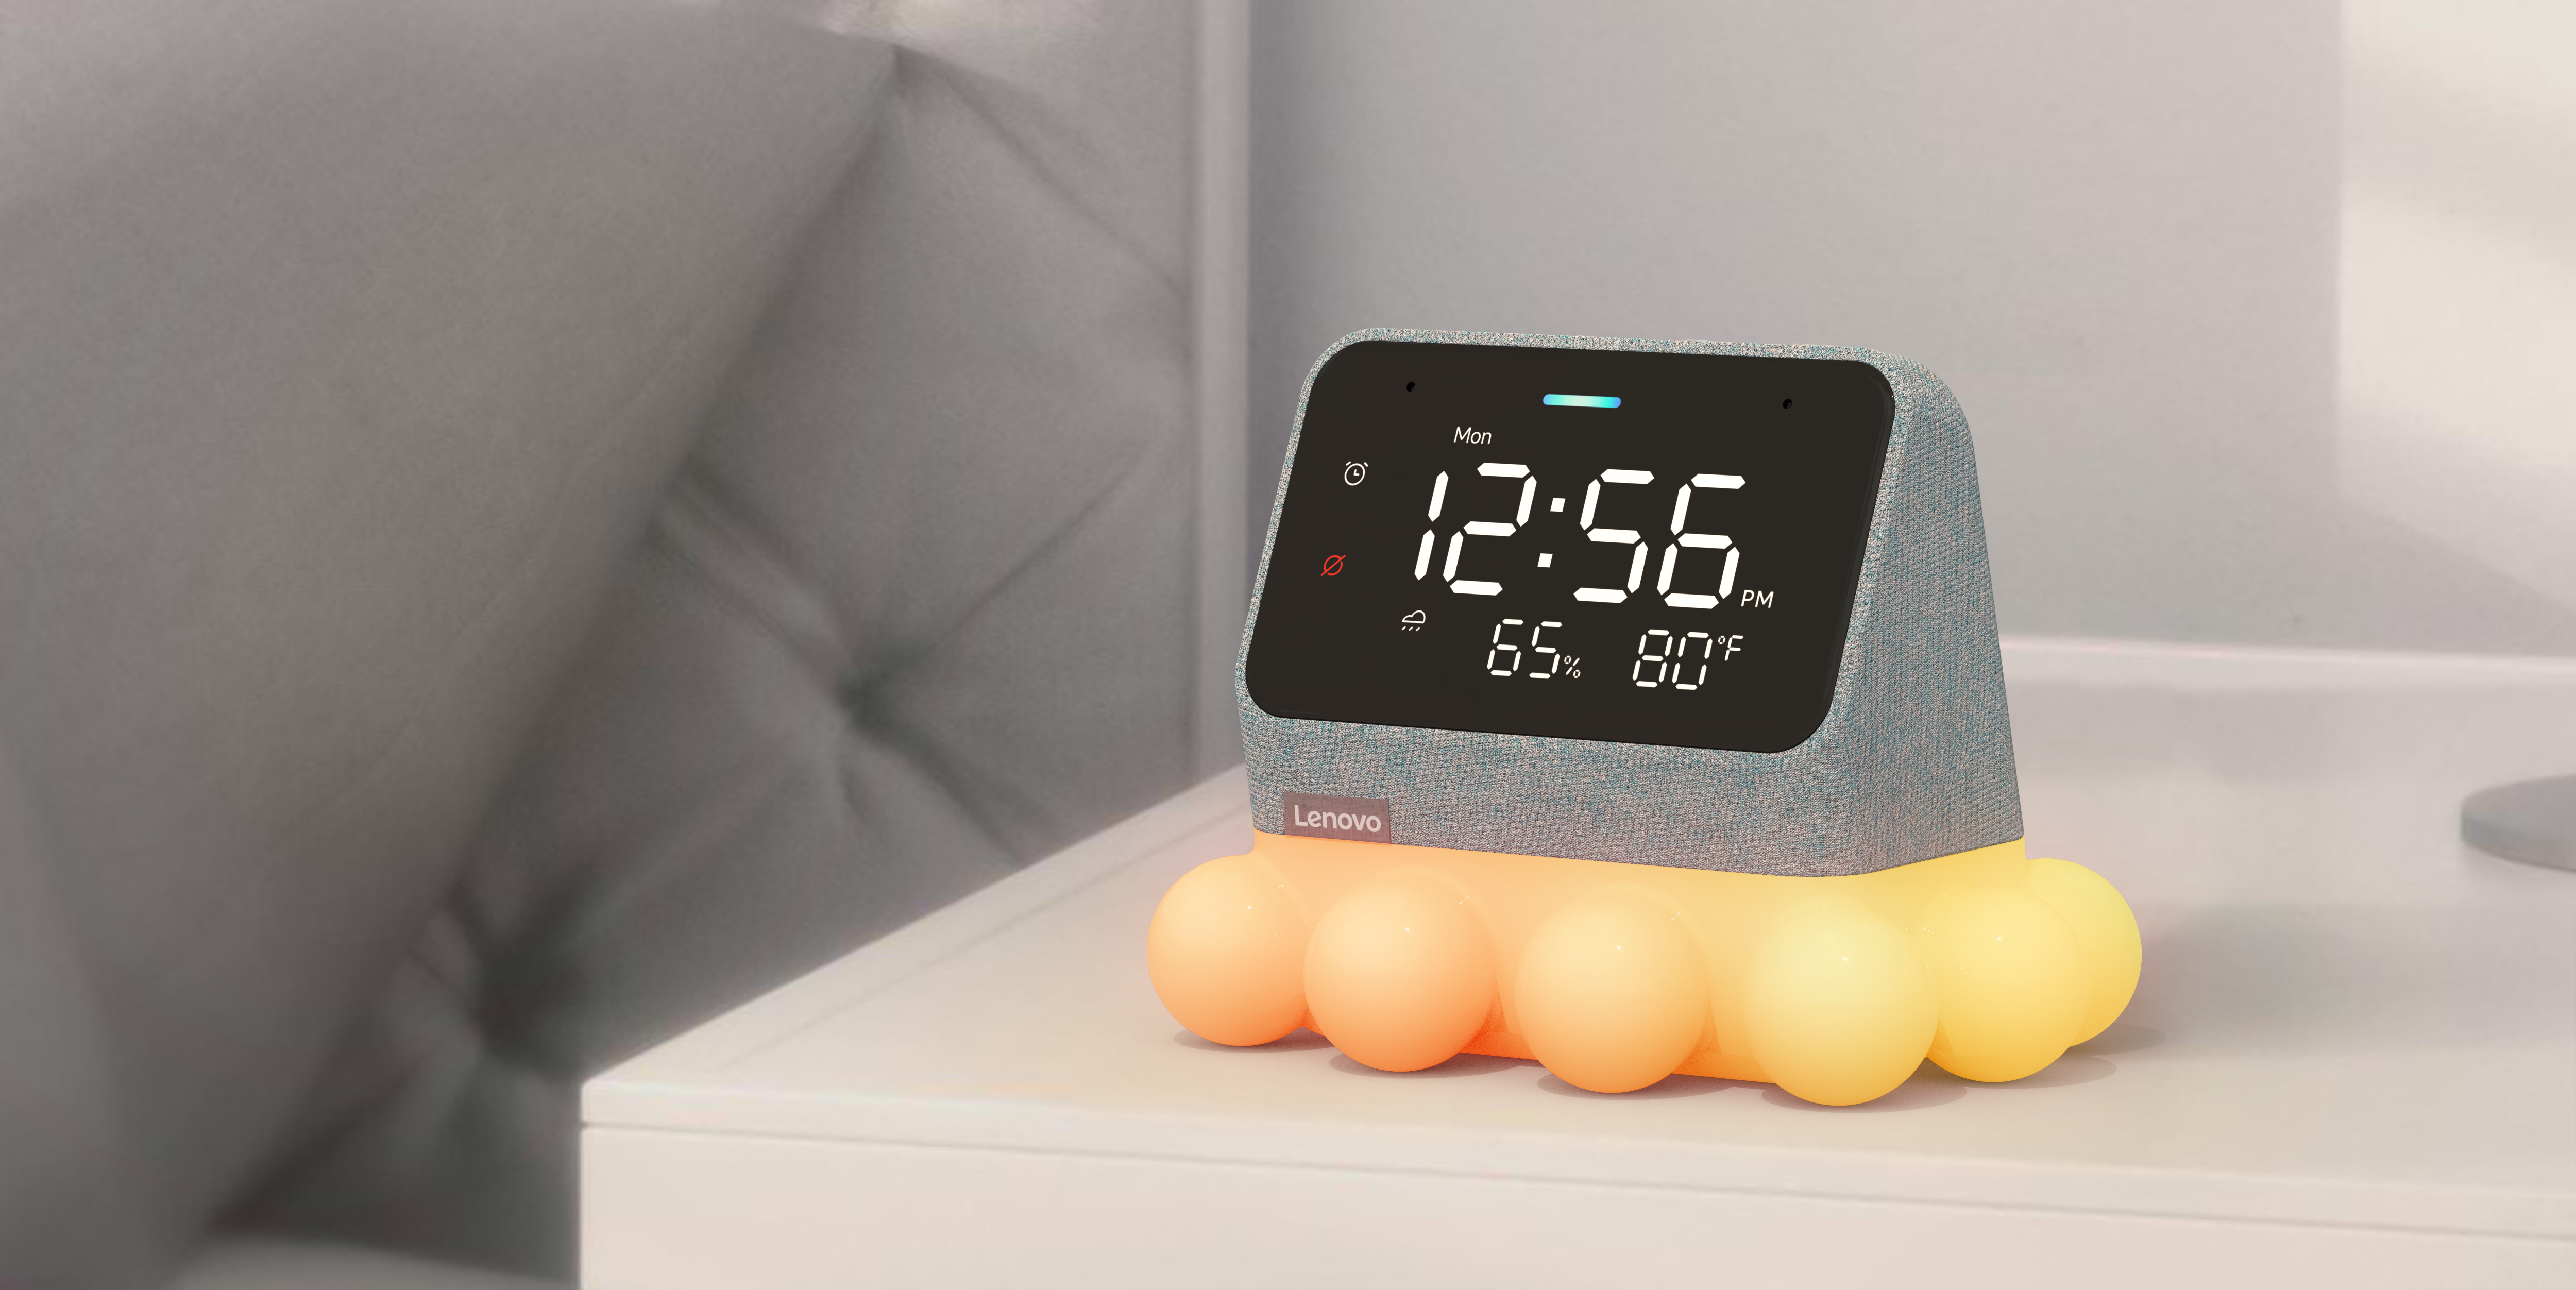 The Lenovo Smart Clock Essential with Alexa Built-in has been announced